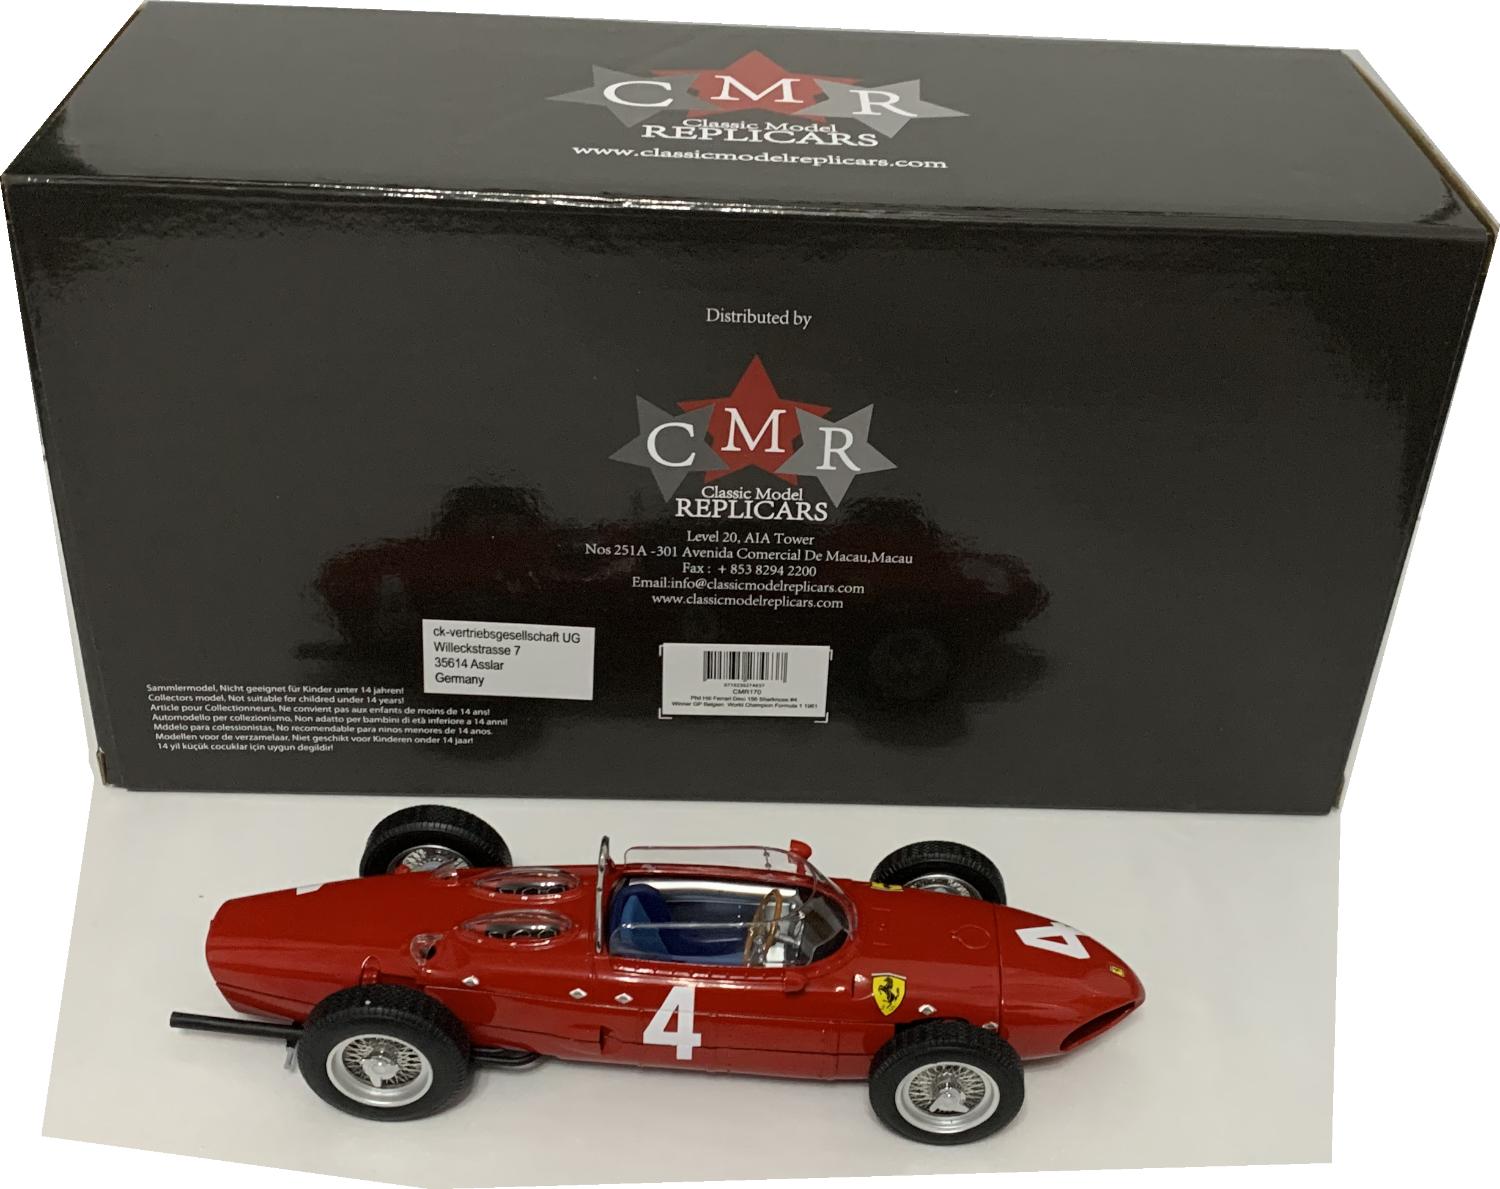 A very high quality accurate representation of the Ferrari Dino 156 Sharknose #4 from the 1961 Monaco F1 GP as driven by the winner Phil Hill for the Ferrari team.